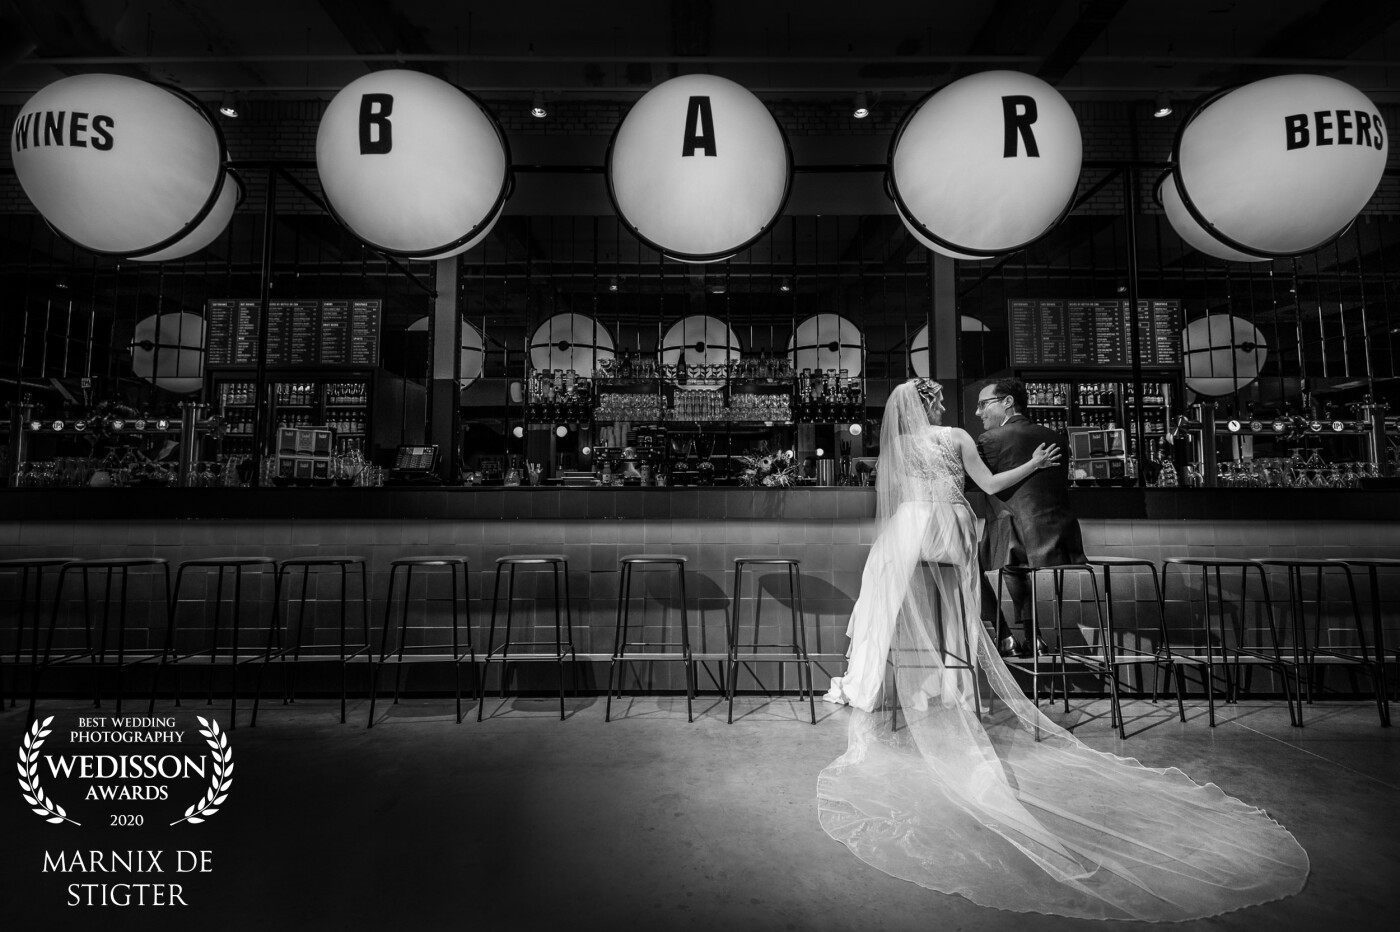 During the photoshoot, it was so windy outside that we had to find shelter in a local bar. This place created a fitting scene for one of my favorite shots of the day. Fun fact was that they actually had met in a bar, so this added extra meaning to the image.